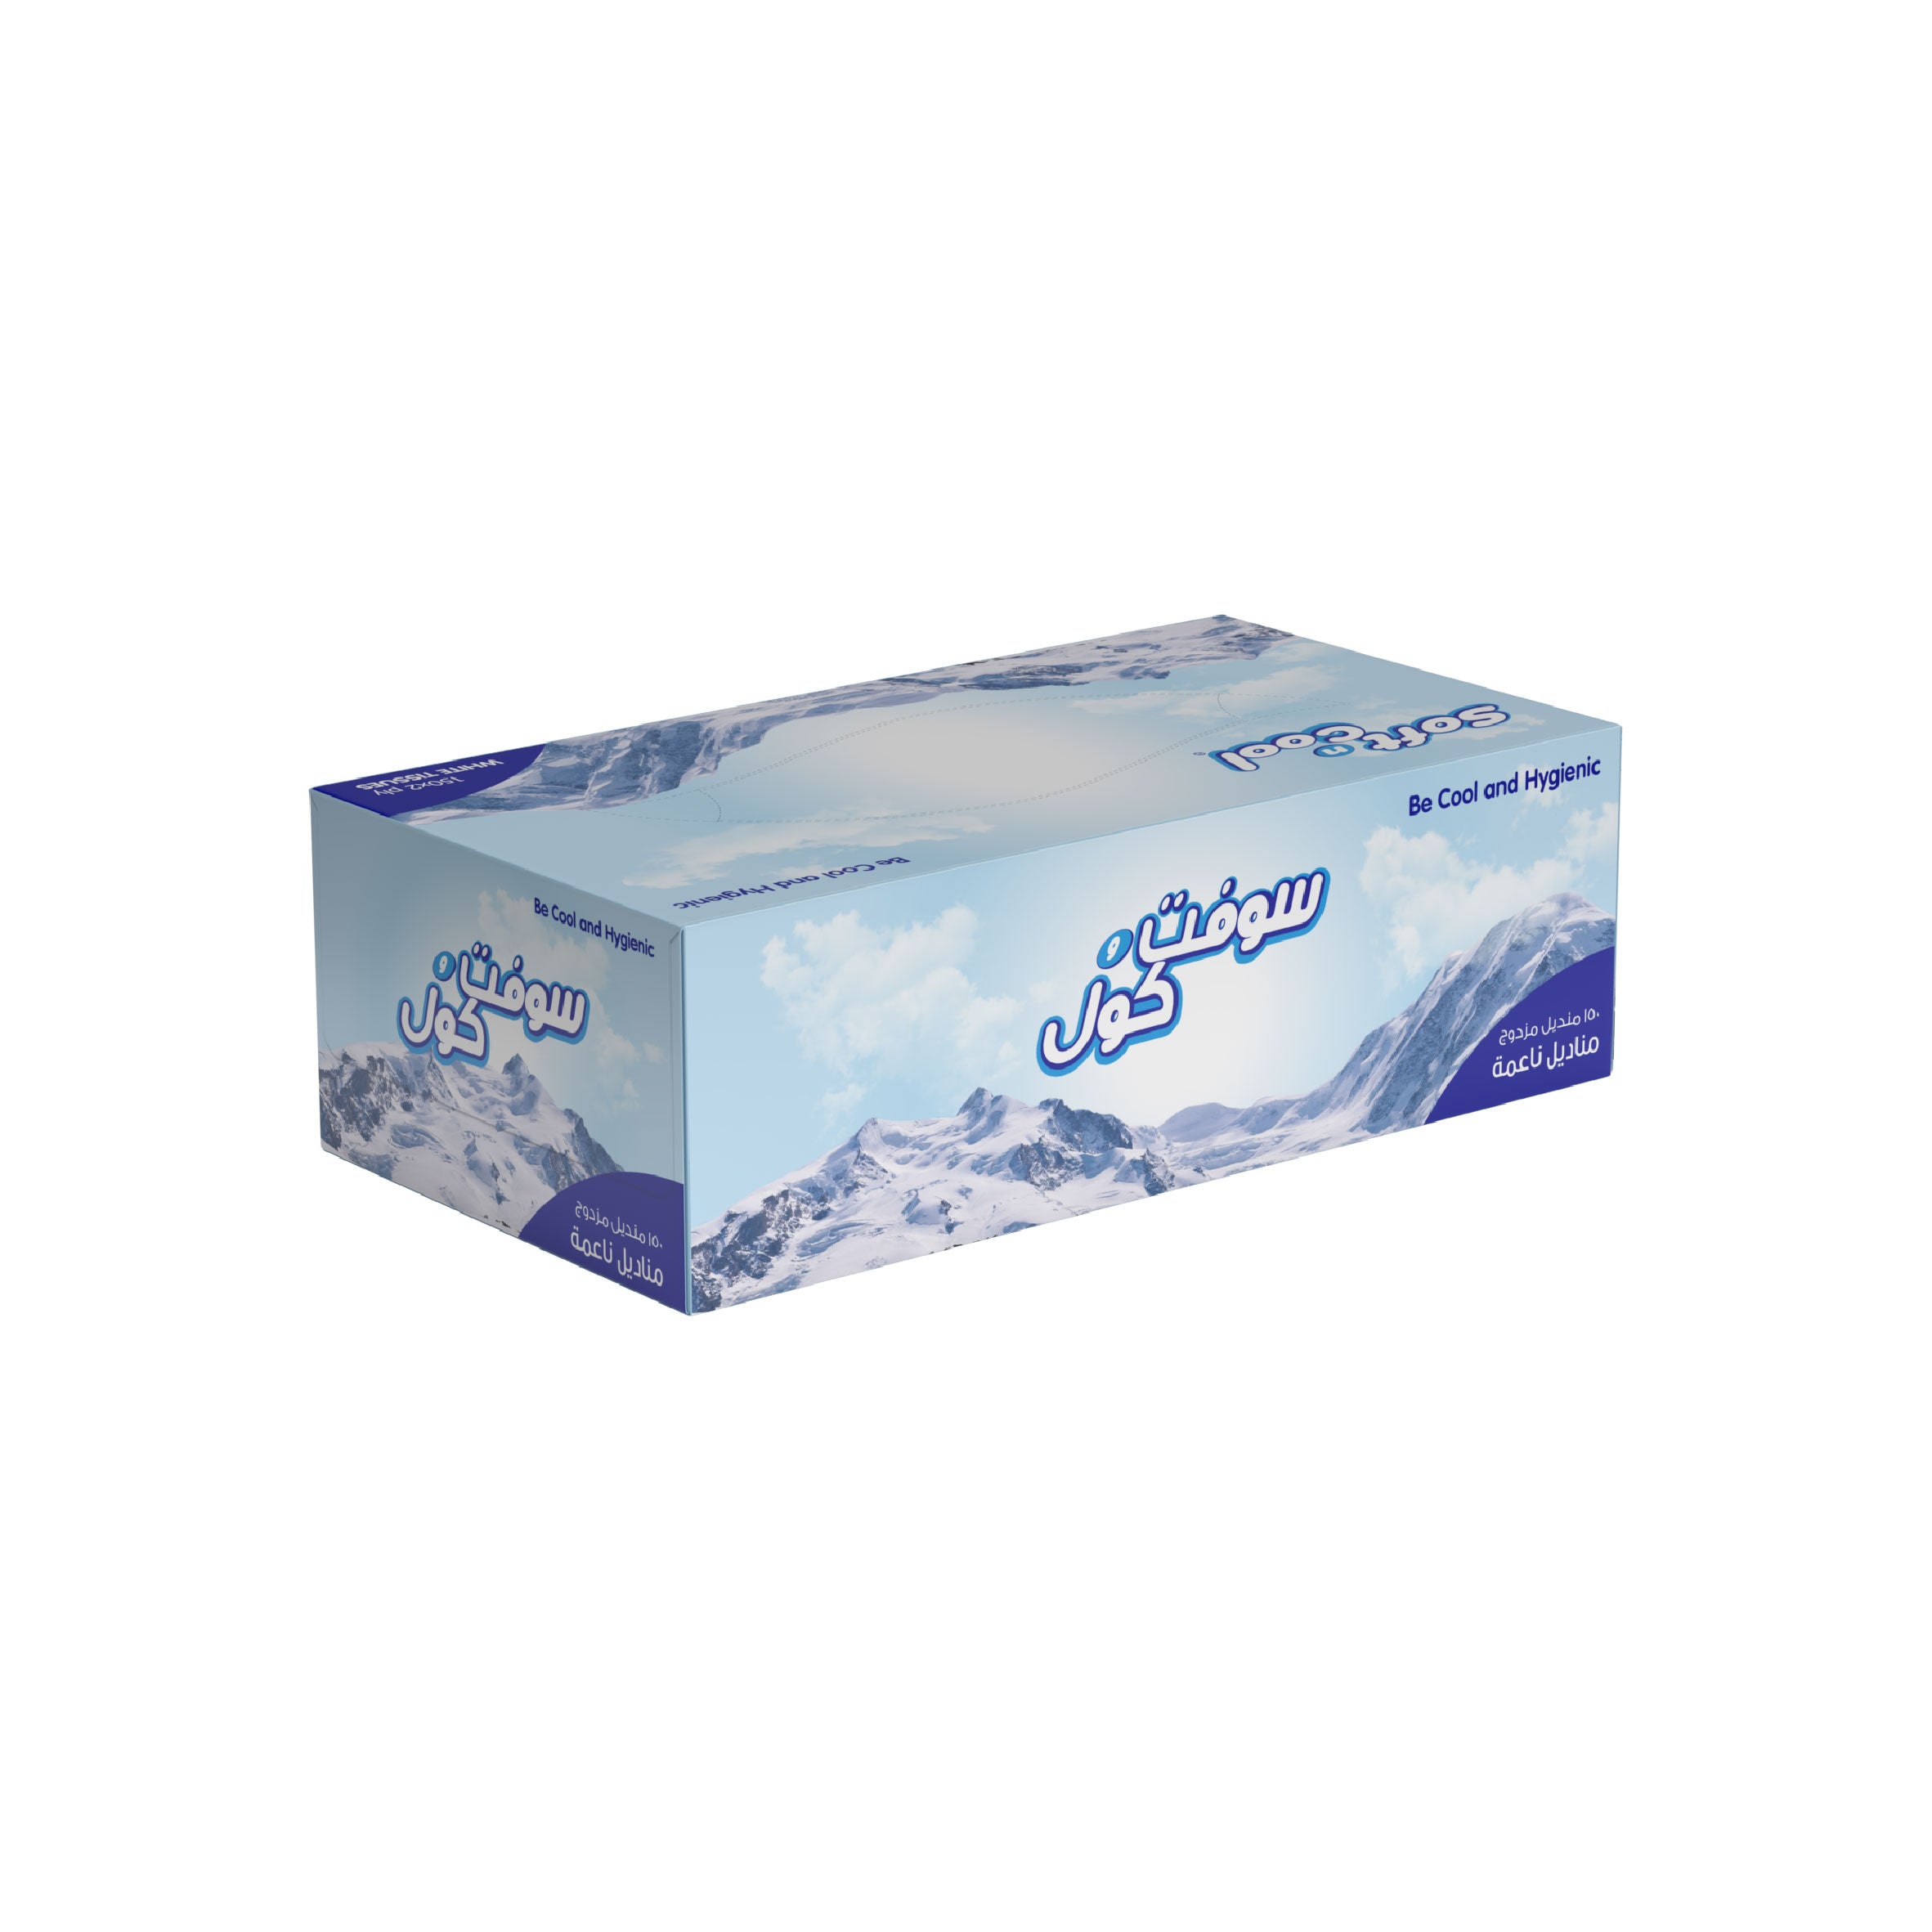 30 boxes Soft n Cool Facial Tissue 150 Sheets x 2 ply - Hotpack UAE